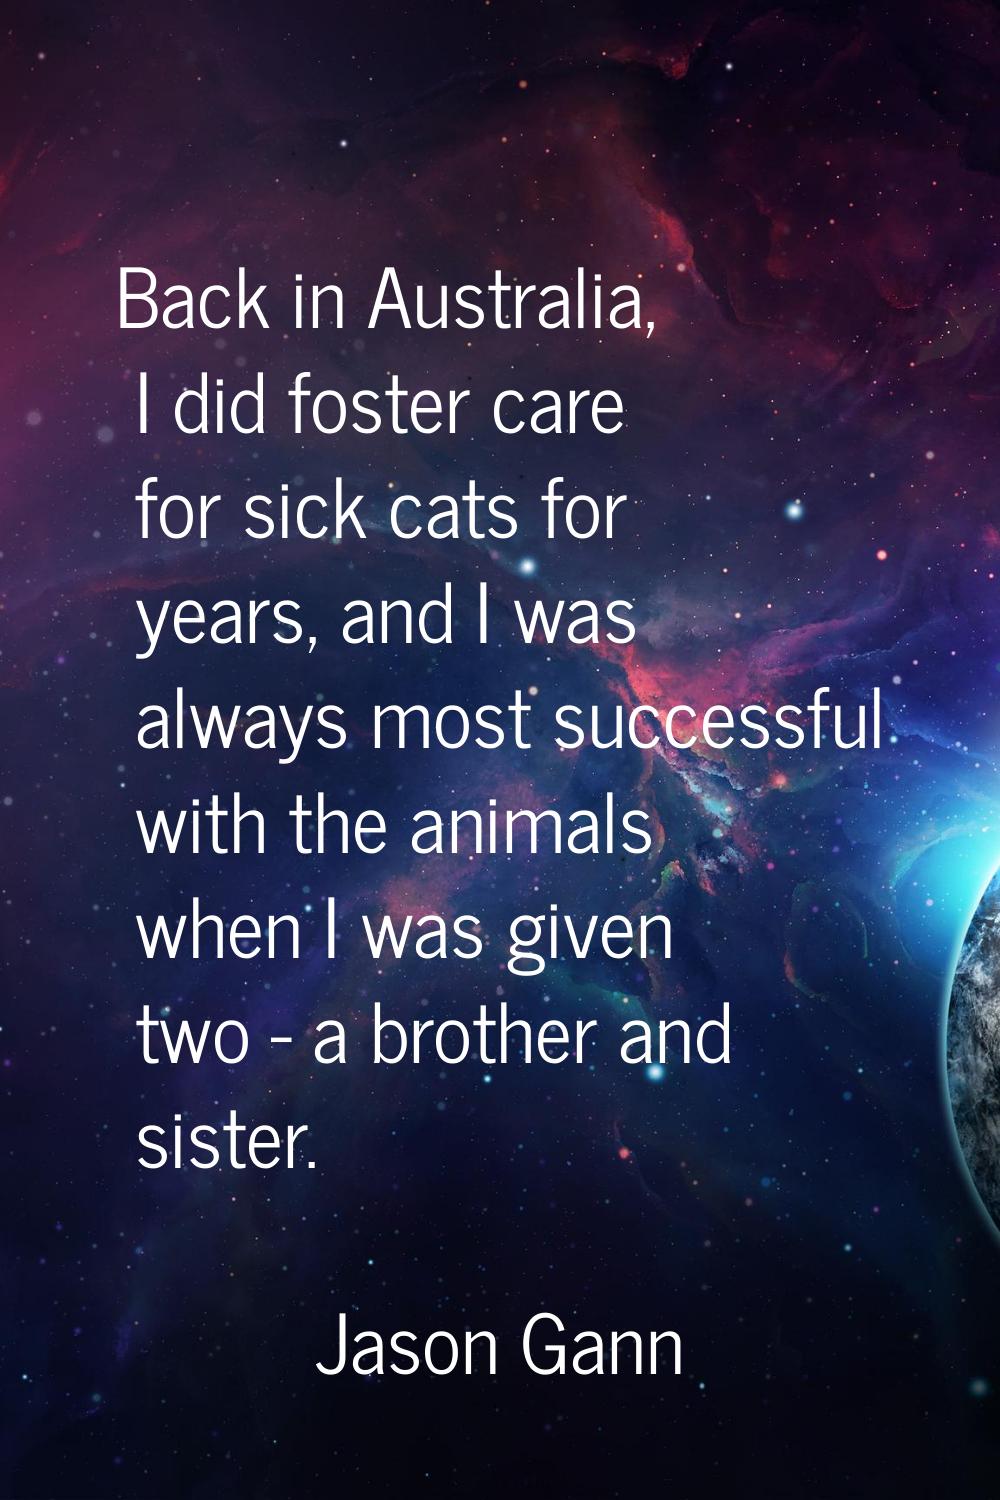 Back in Australia, I did foster care for sick cats for years, and I was always most successful with